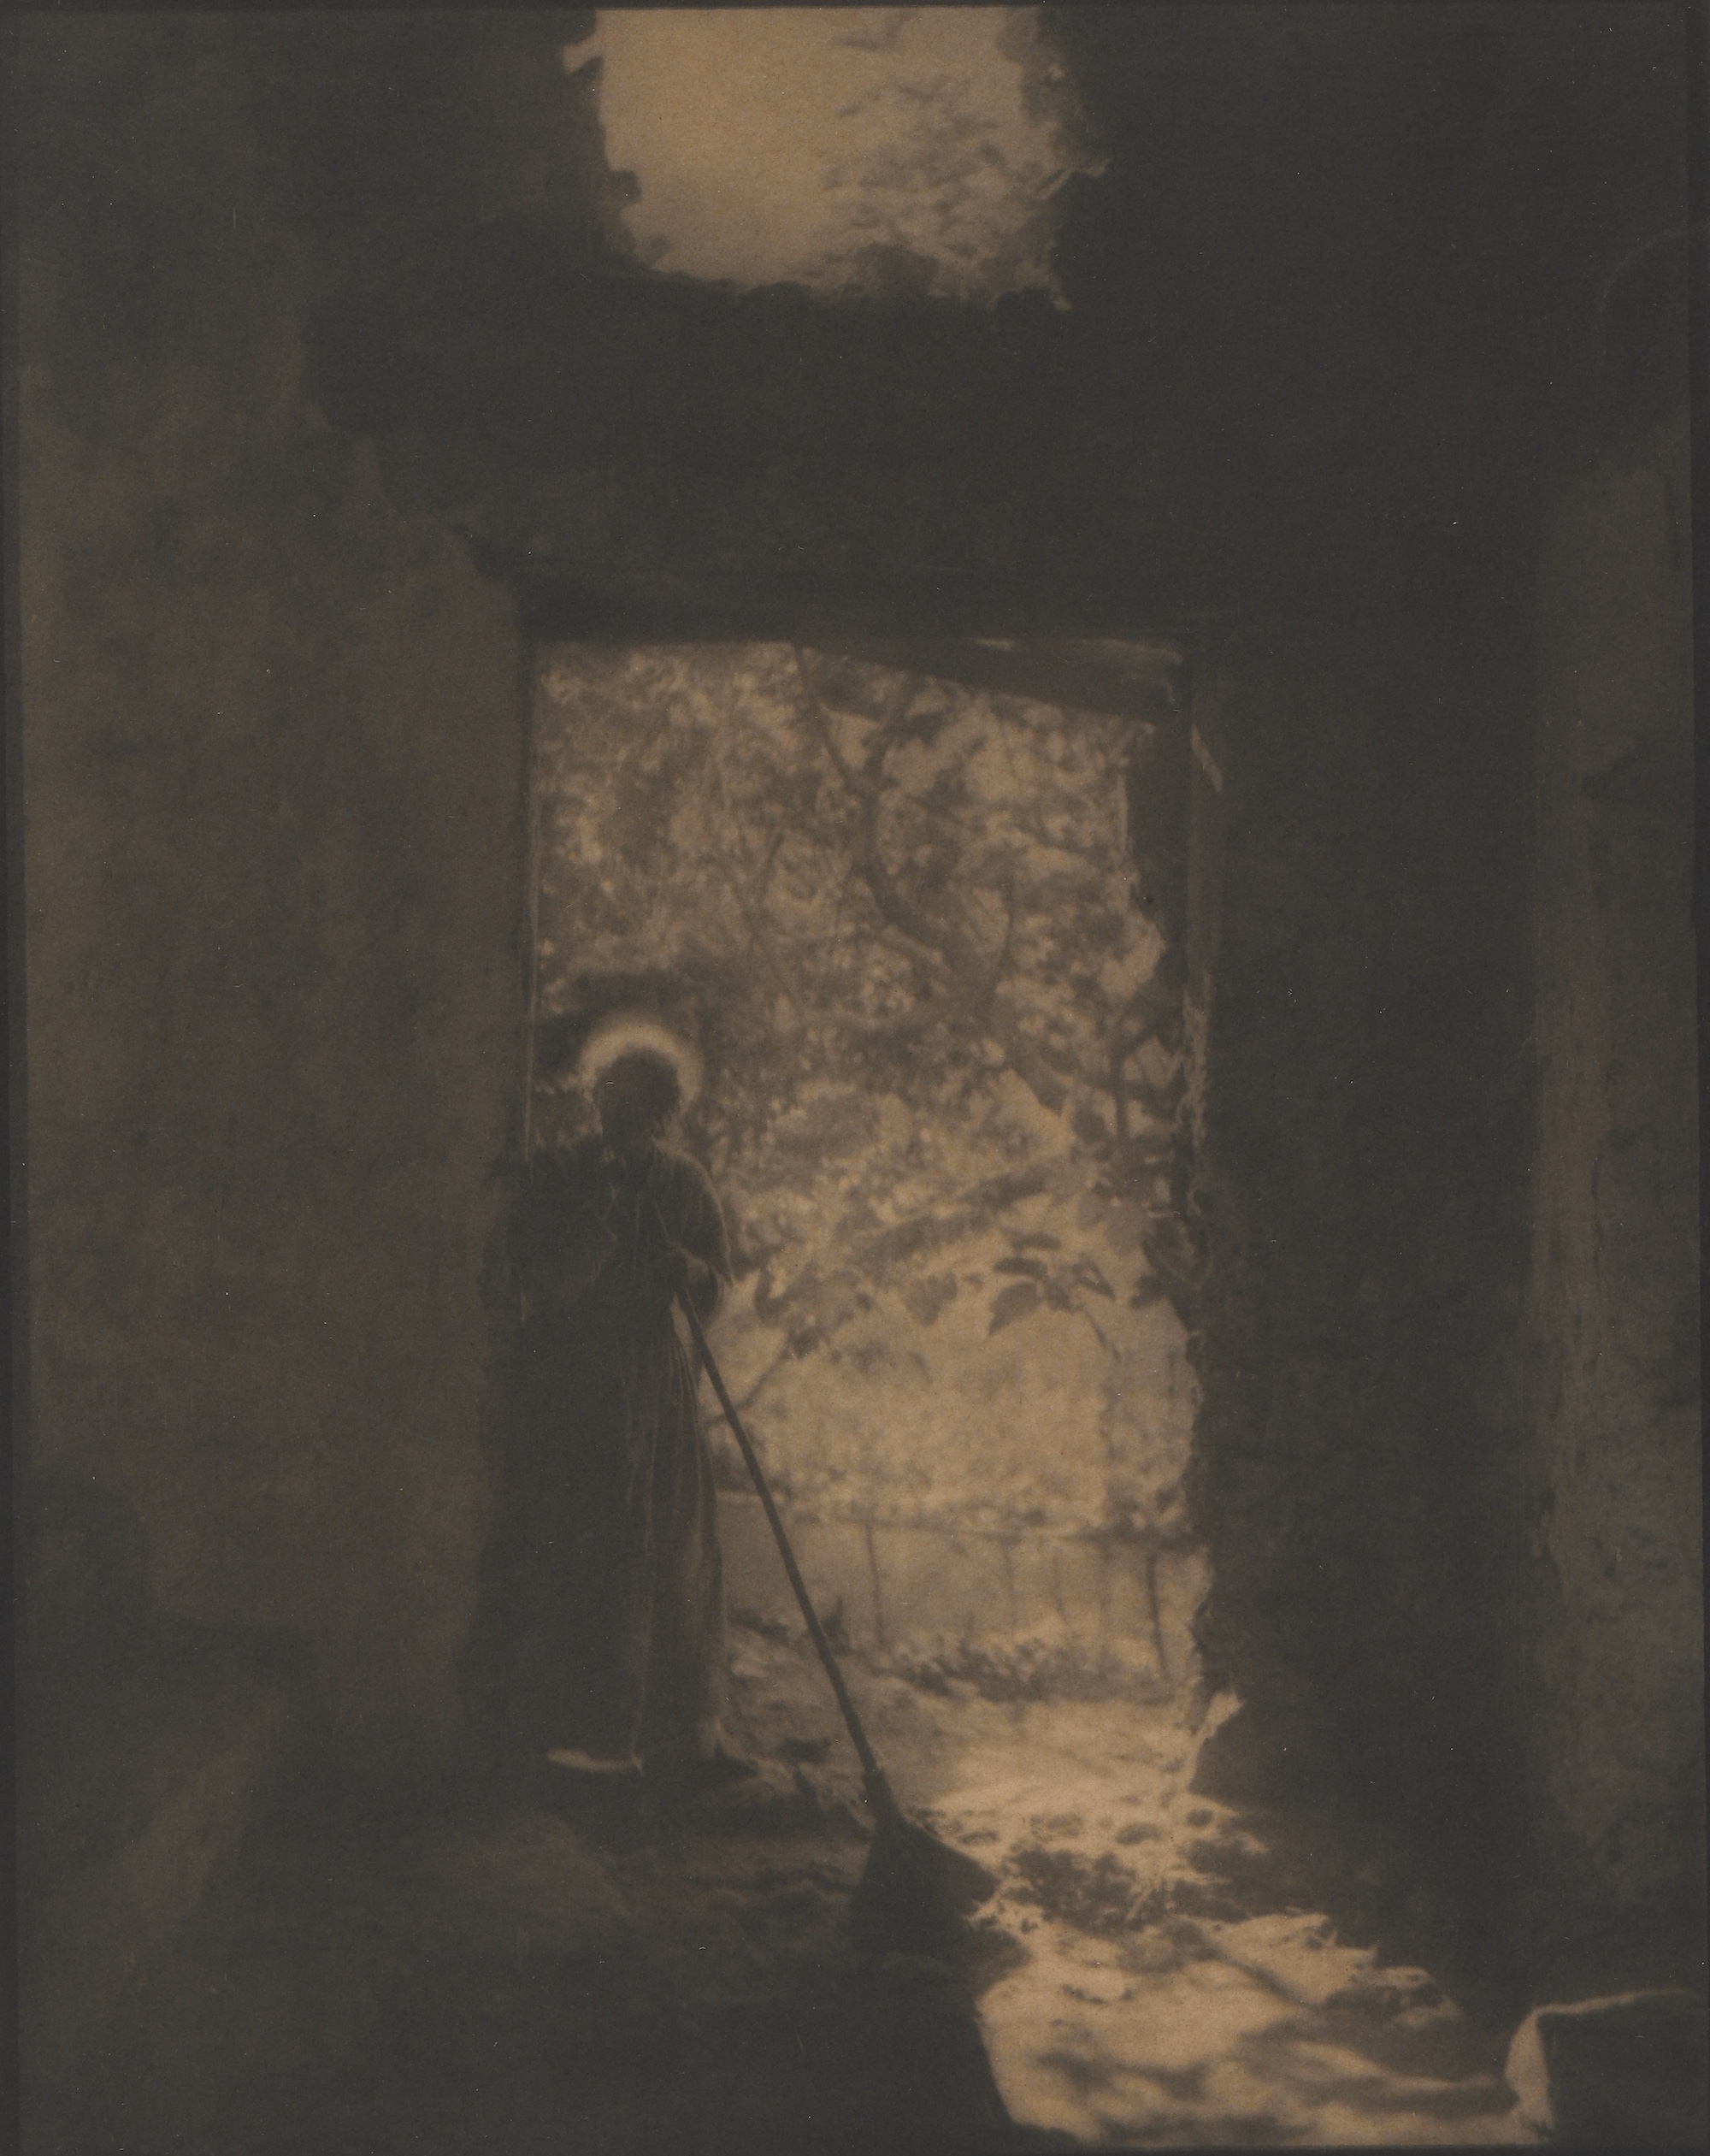 Sepia-toned photograph shows a woman standing in a darkened doorway, the world beyond illuminated